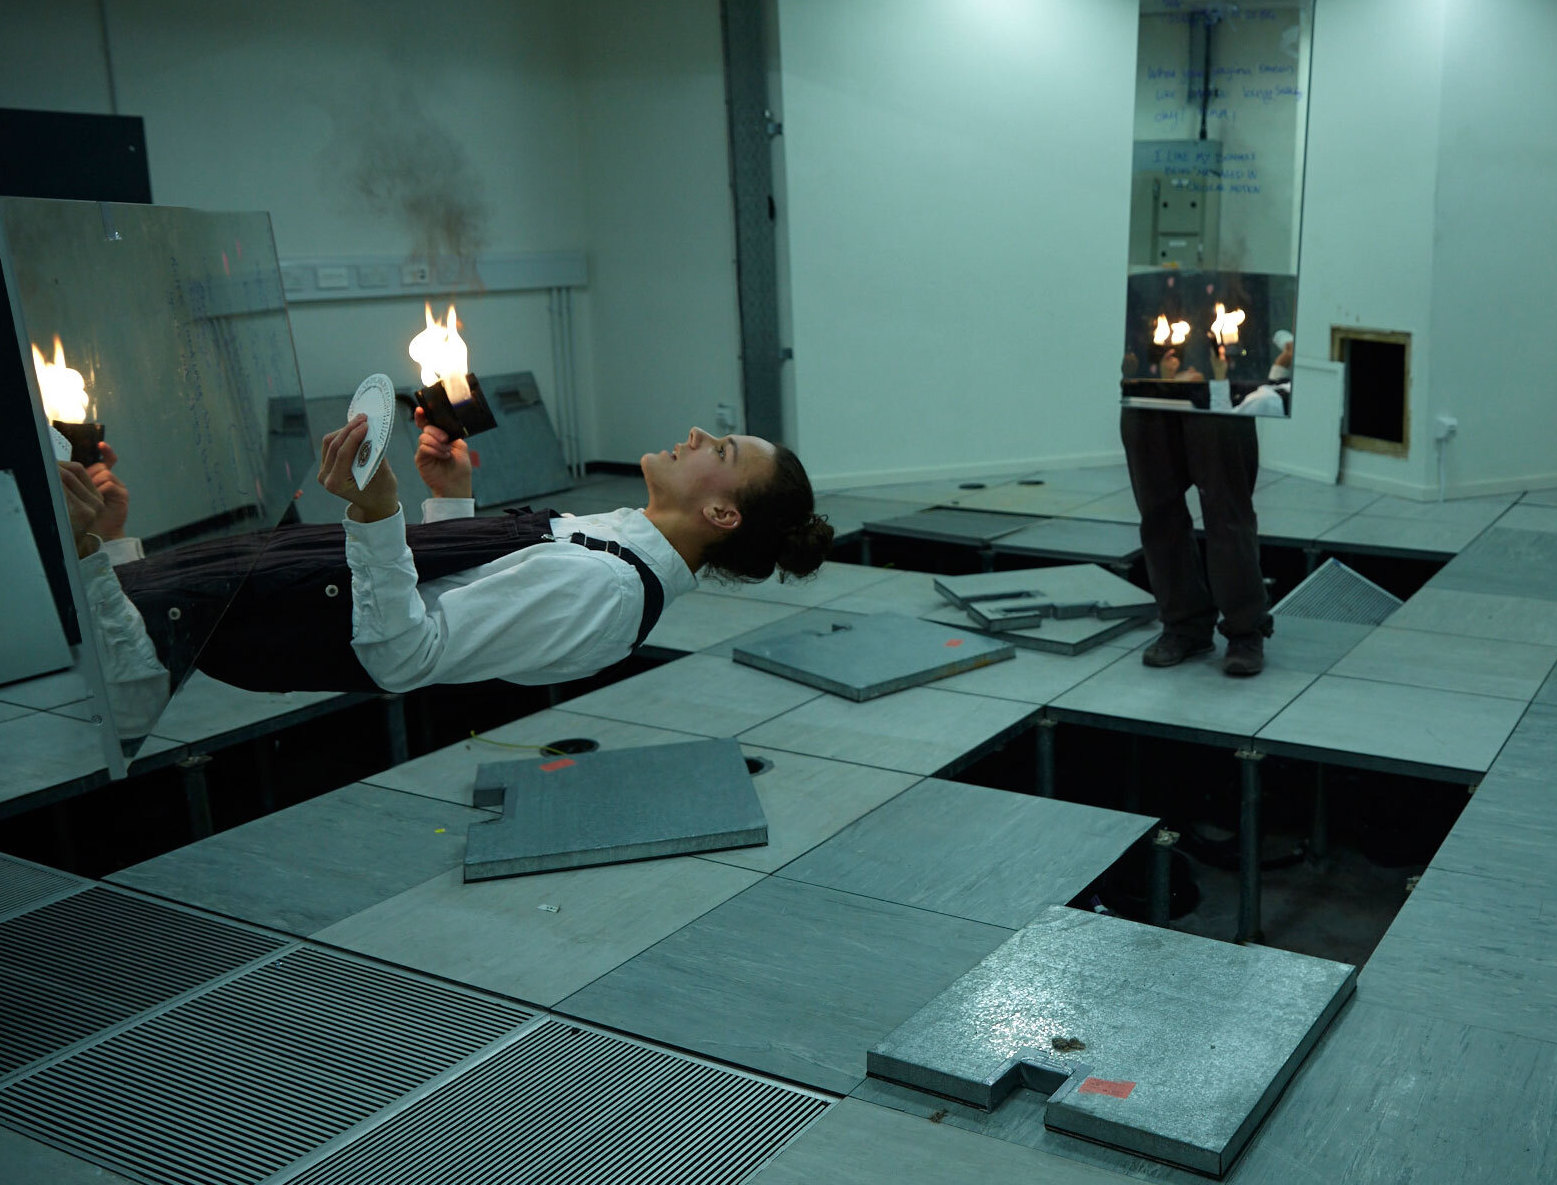 A person wearing a white shirt and black dungarees appears to be in two halves in an abandoned office room. The torso is horizontally disappearing into a mirror in the fore front of the image. The legs are standing vertically in the background with a mirror as the body, the mirror is reflecting the torso. The torso is holding an object on fire and a pack of cards spread in a fan.